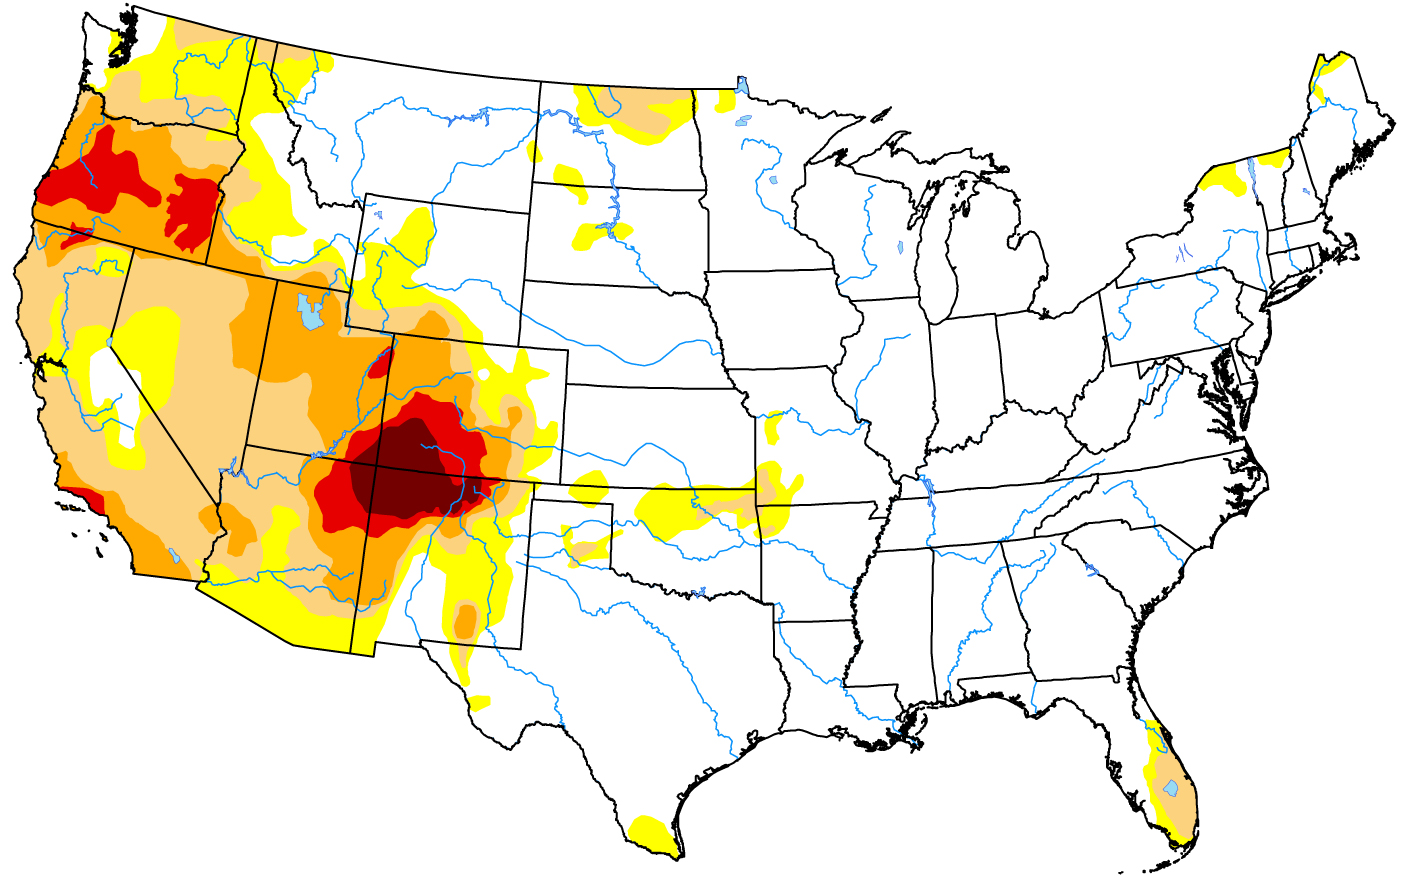 Map monitoring drought conditions across the continental U.S.